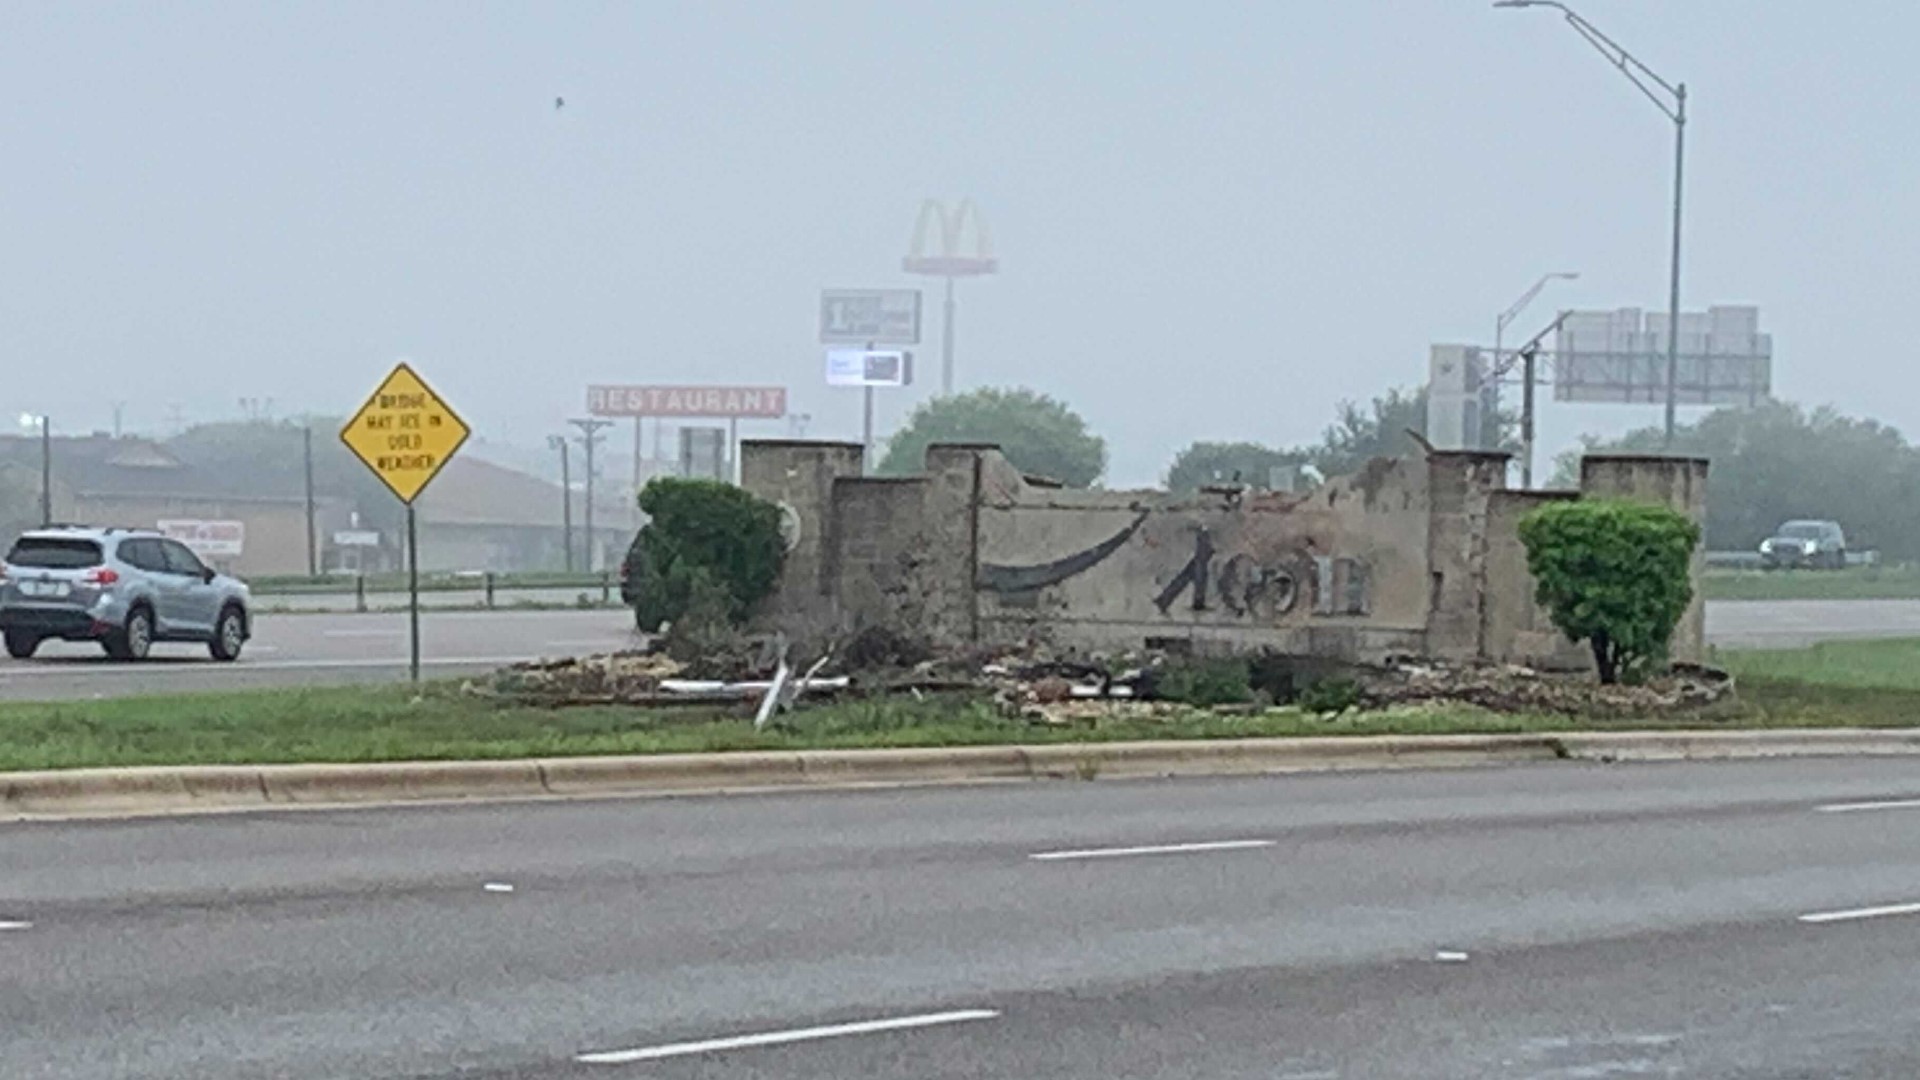 Police said Julianna Allen was distracted by her phone when she crashed into the "Welcome to Killeen" sign.